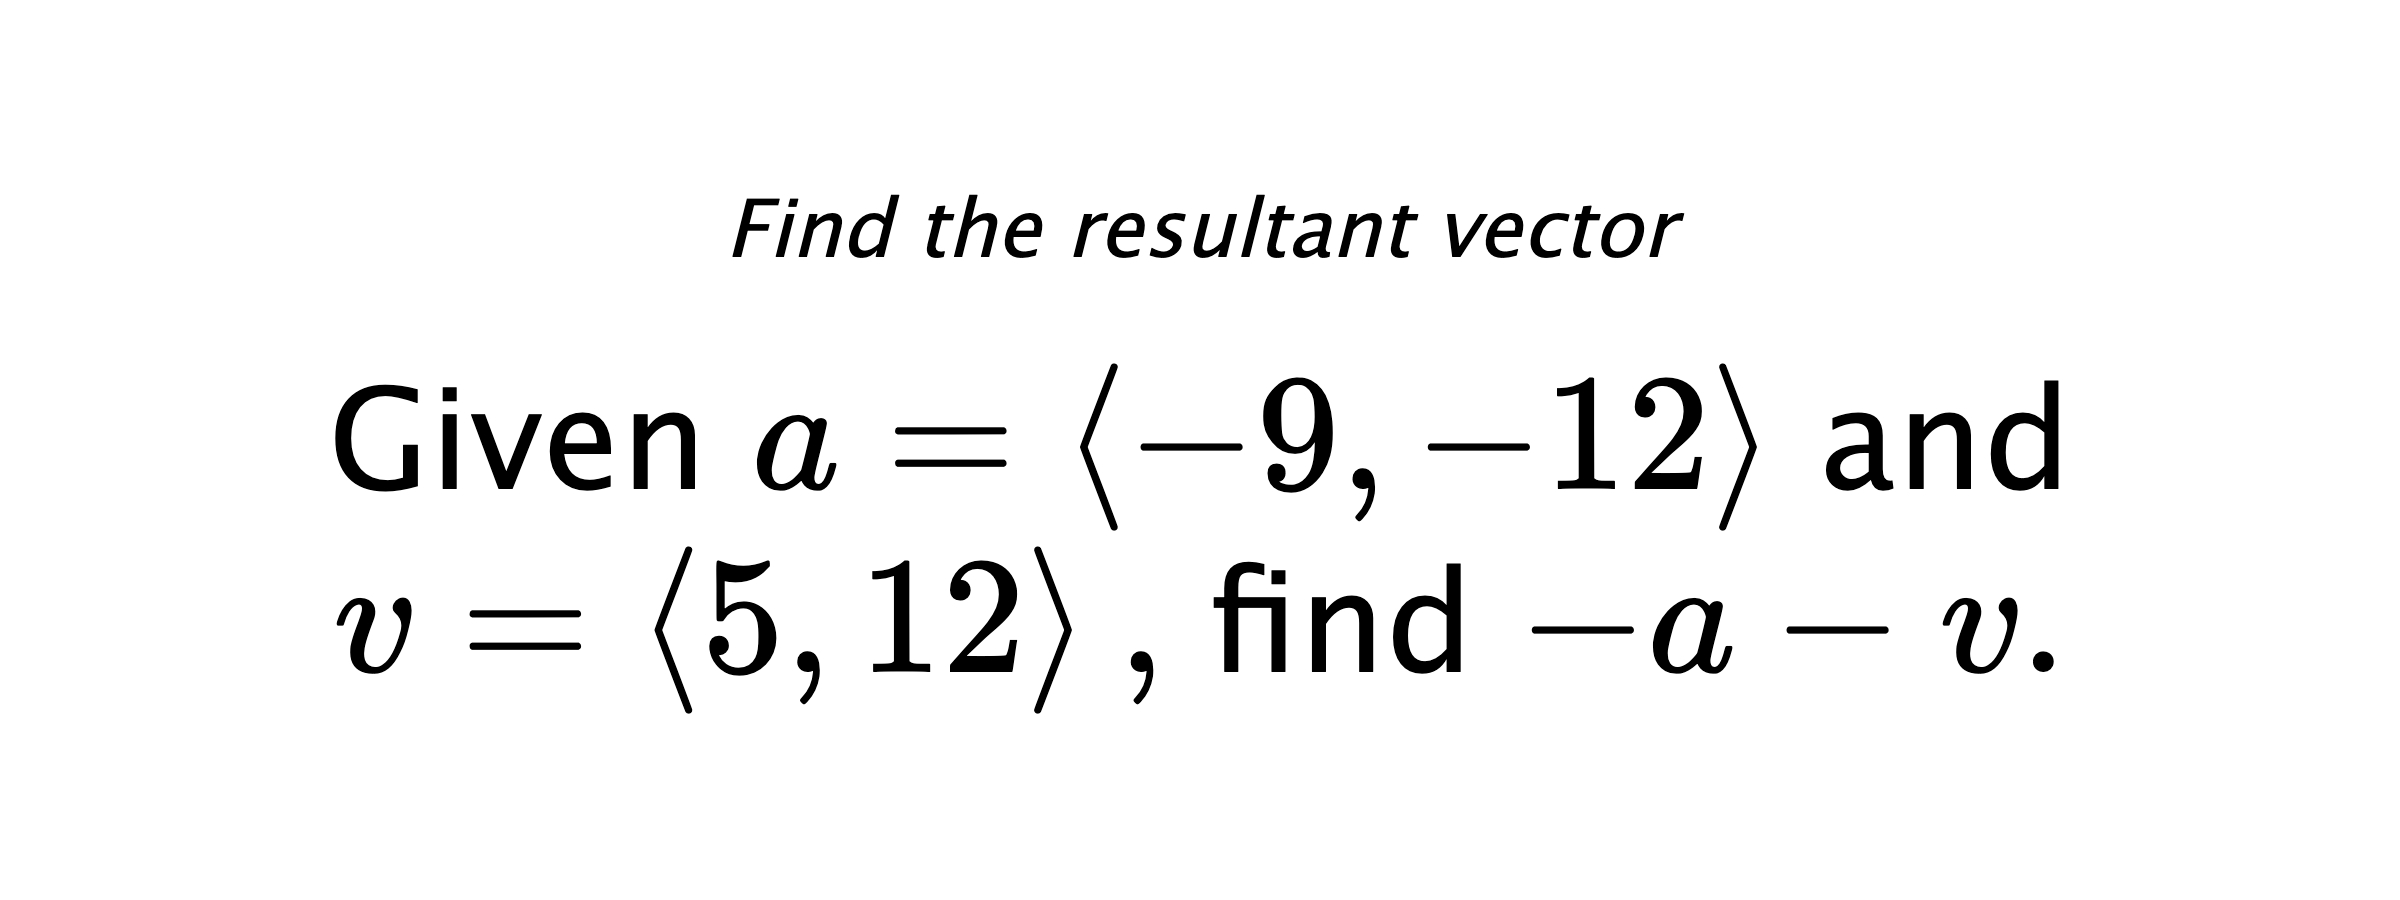 Find the resultant vector Given $ a = \left< -9,-12 \right> $ and $ v = \left< 5,12 \right> ,$ find $ -a-v .$